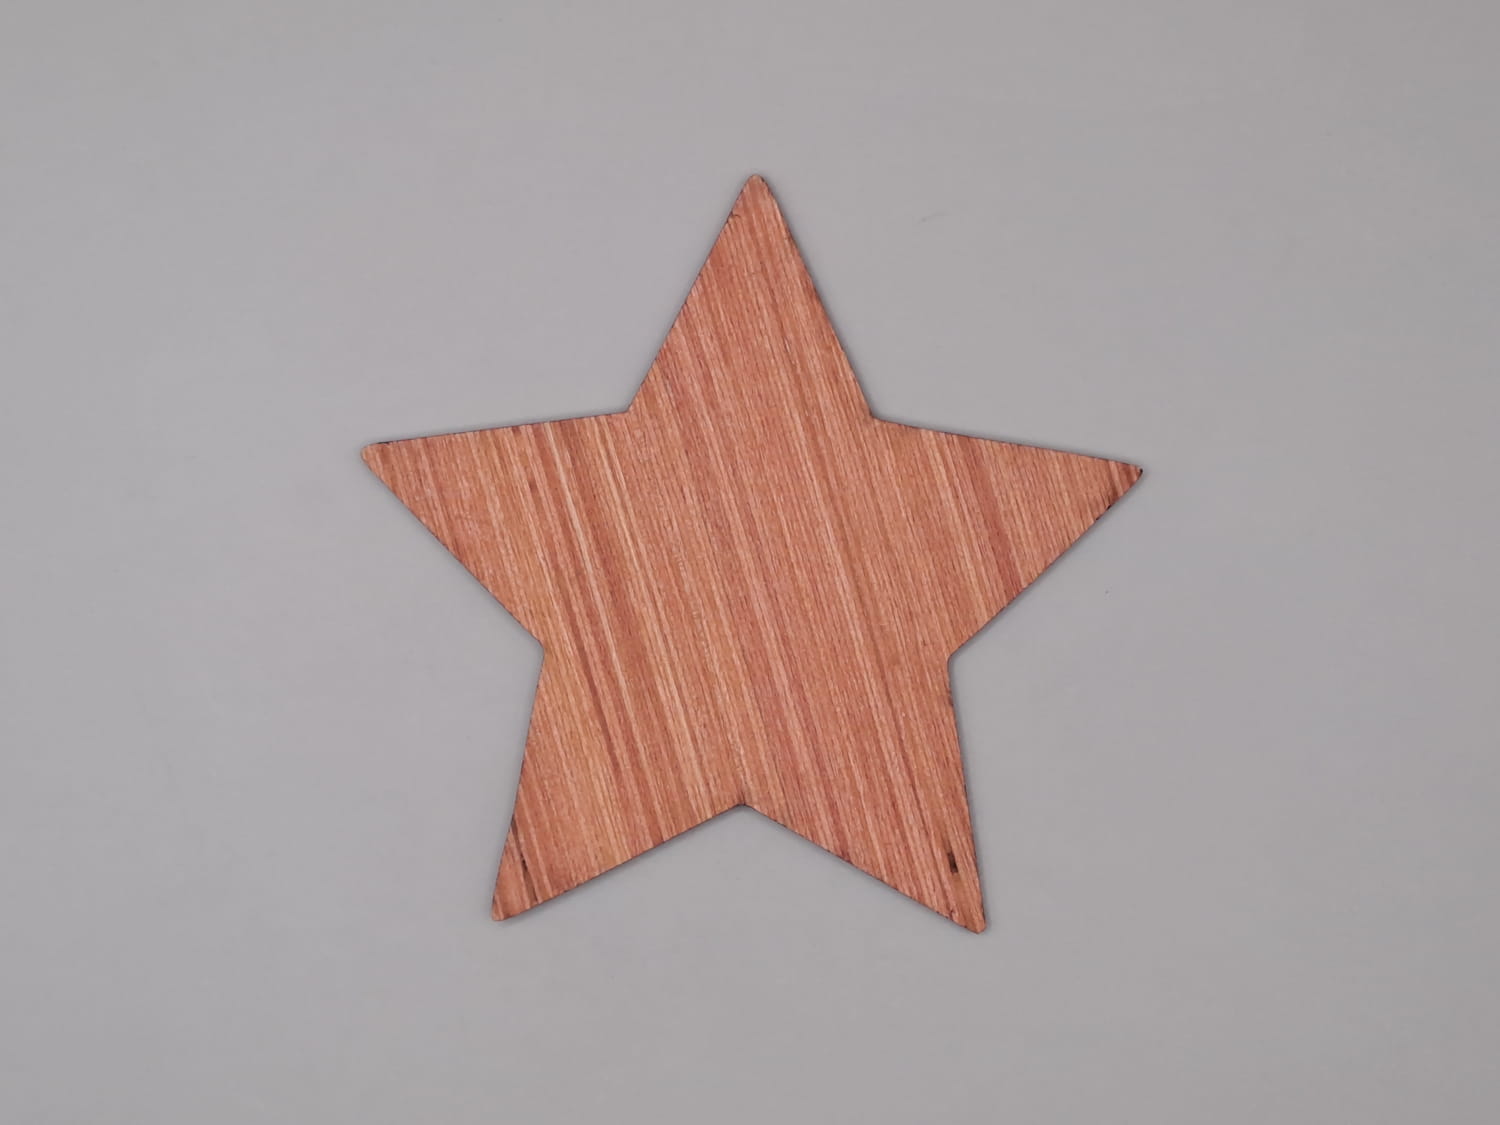 Laser Cut Unfinished Wooden Star Cutout Shape For Crafts Free Vector